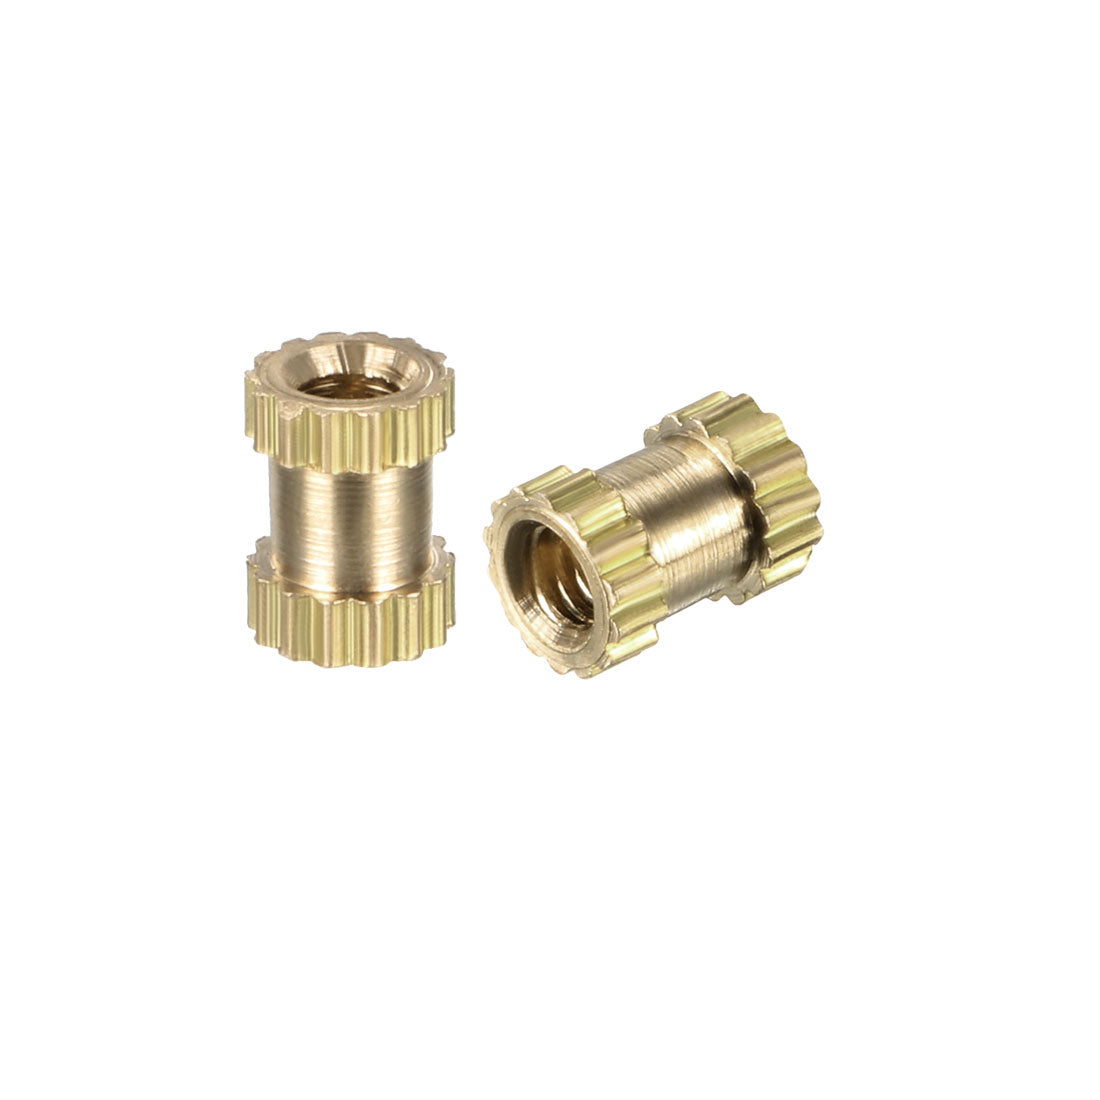 uxcell Uxcell Knurled Insert Nuts - Female Thread Threaded Insert Embedment Nut